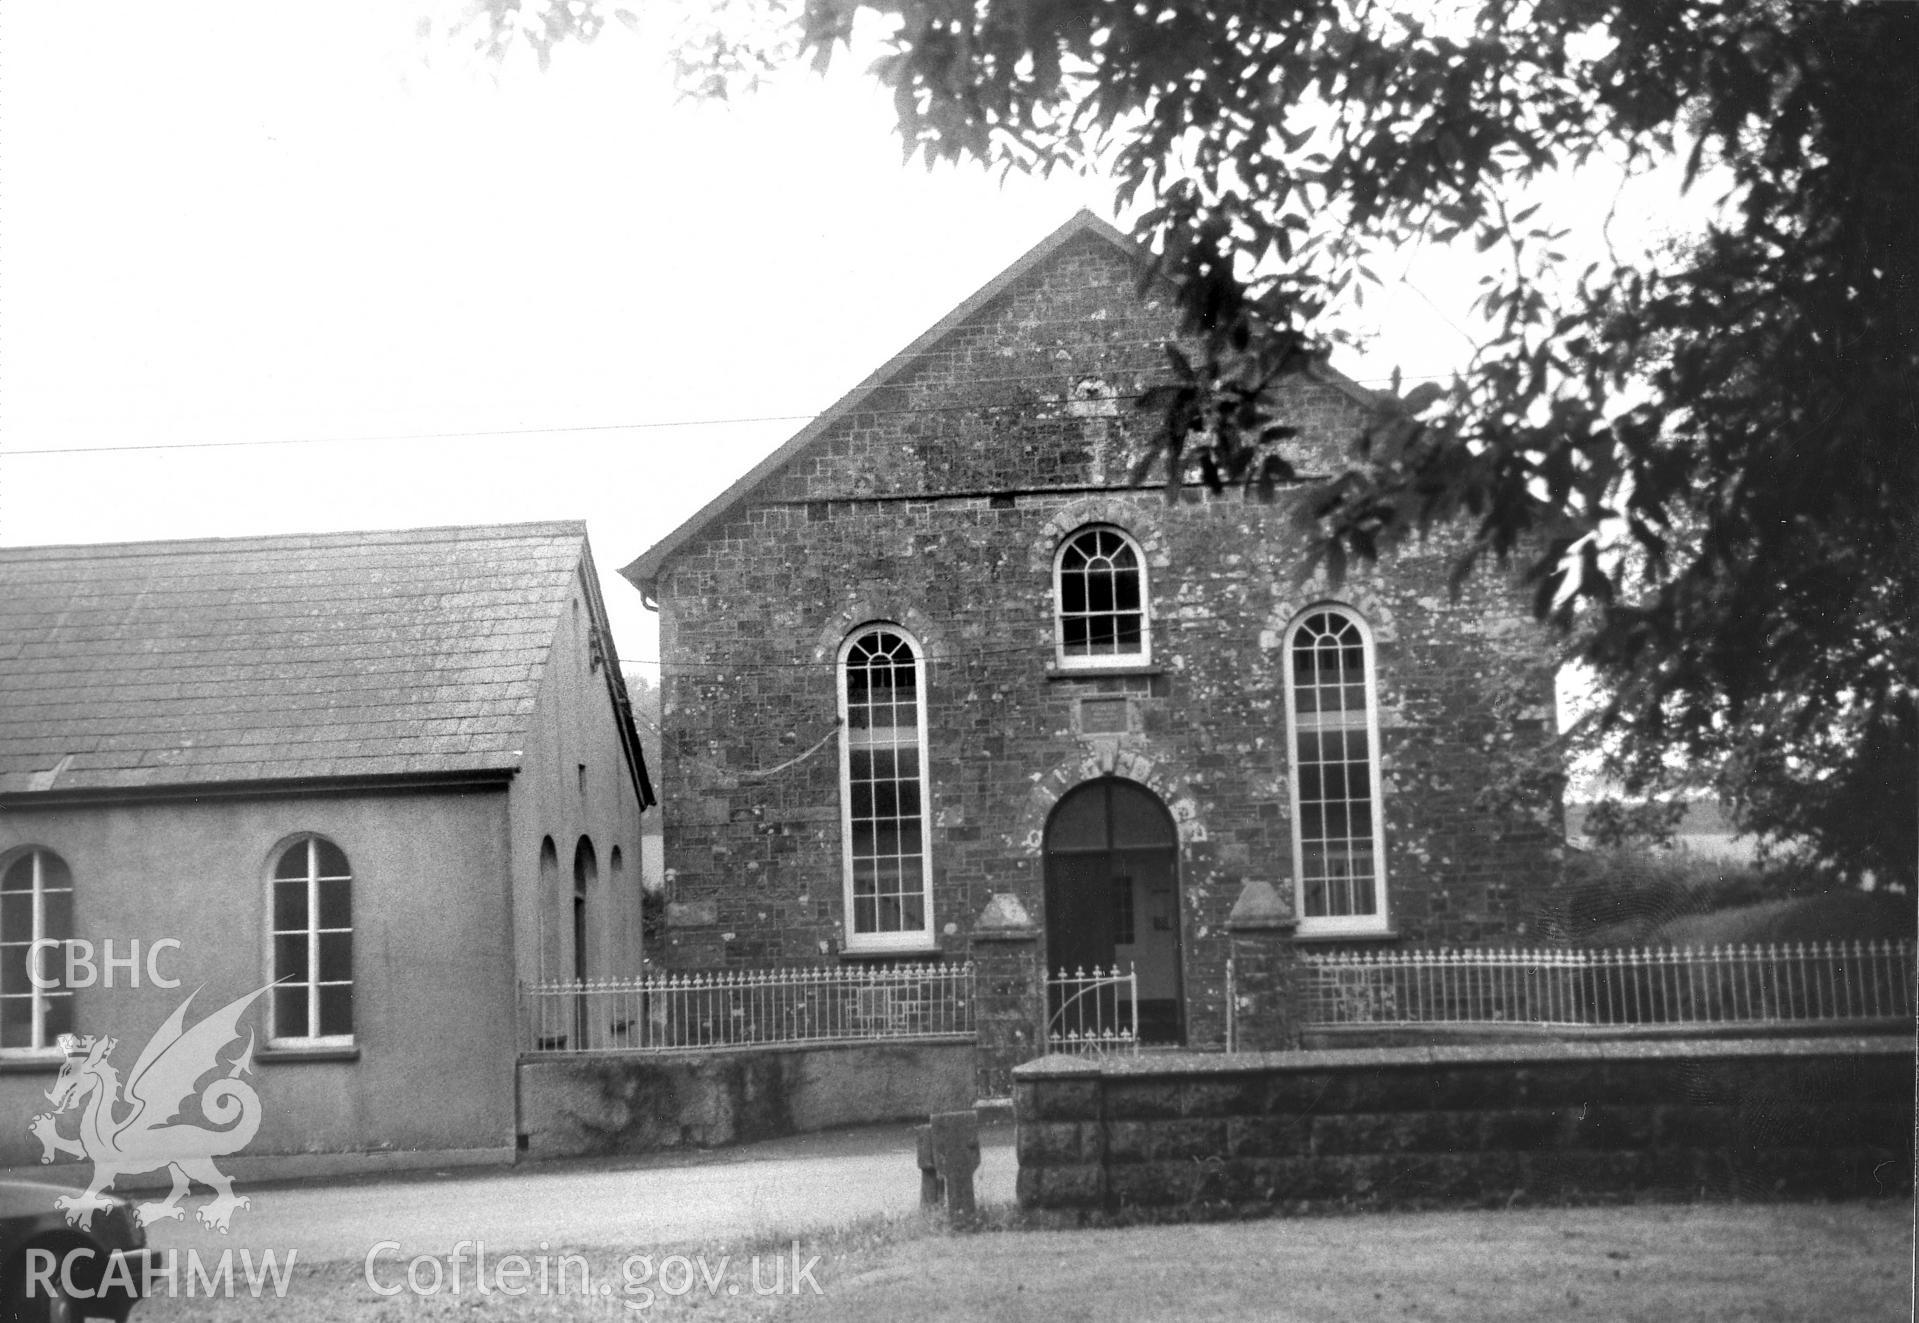 Digital copy of a black and white photograph showing an exterior view of Pisgah Independent Chapel, taken by Robert Scourfield, 1995.